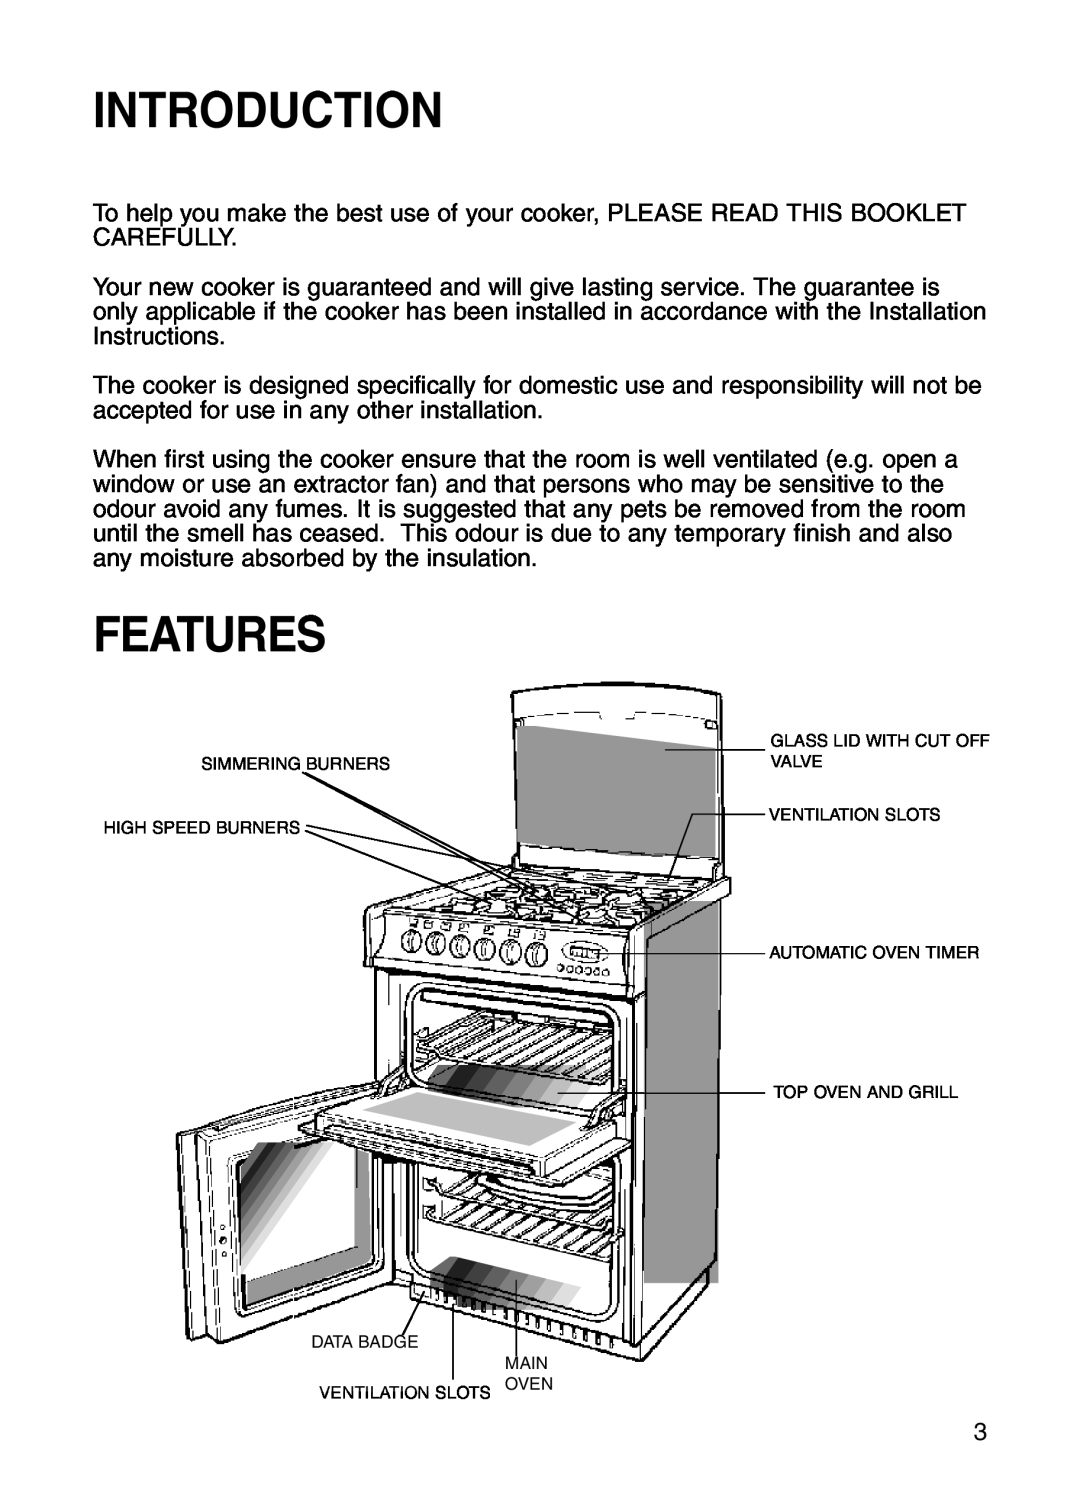 Hotpoint GW81 manual Introduction, Features 